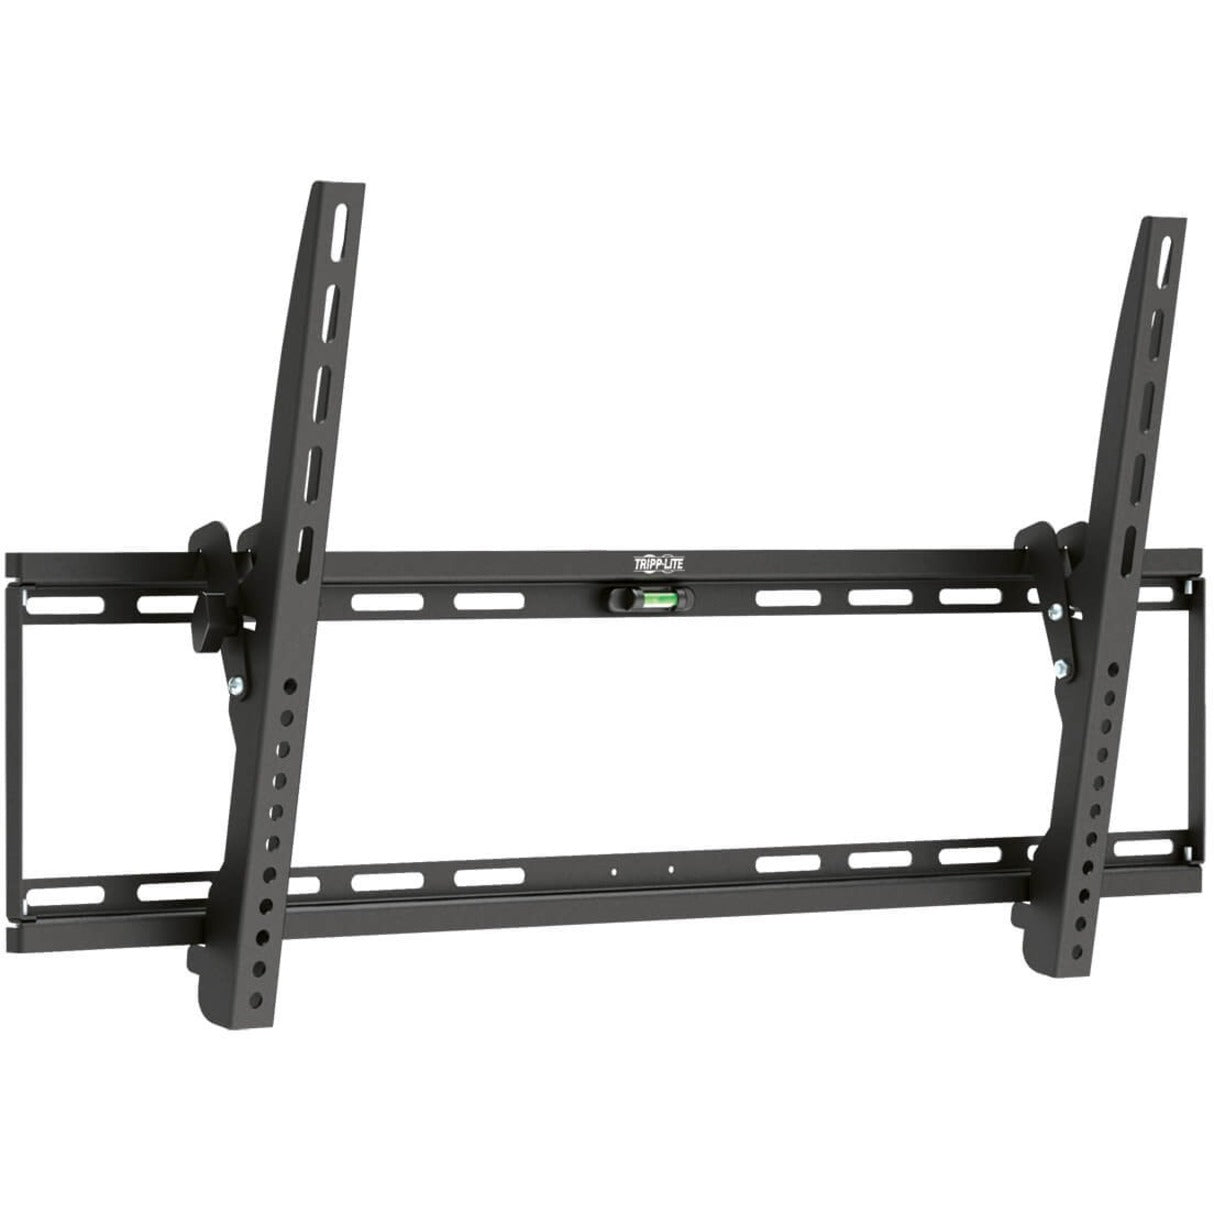 Tripp Lite DWT3770X Tilt Wall Mount for 37" to 70" Flat-Screen Displays, Scratch Resistant, Bubble Level, Adjustable Viewing Angle